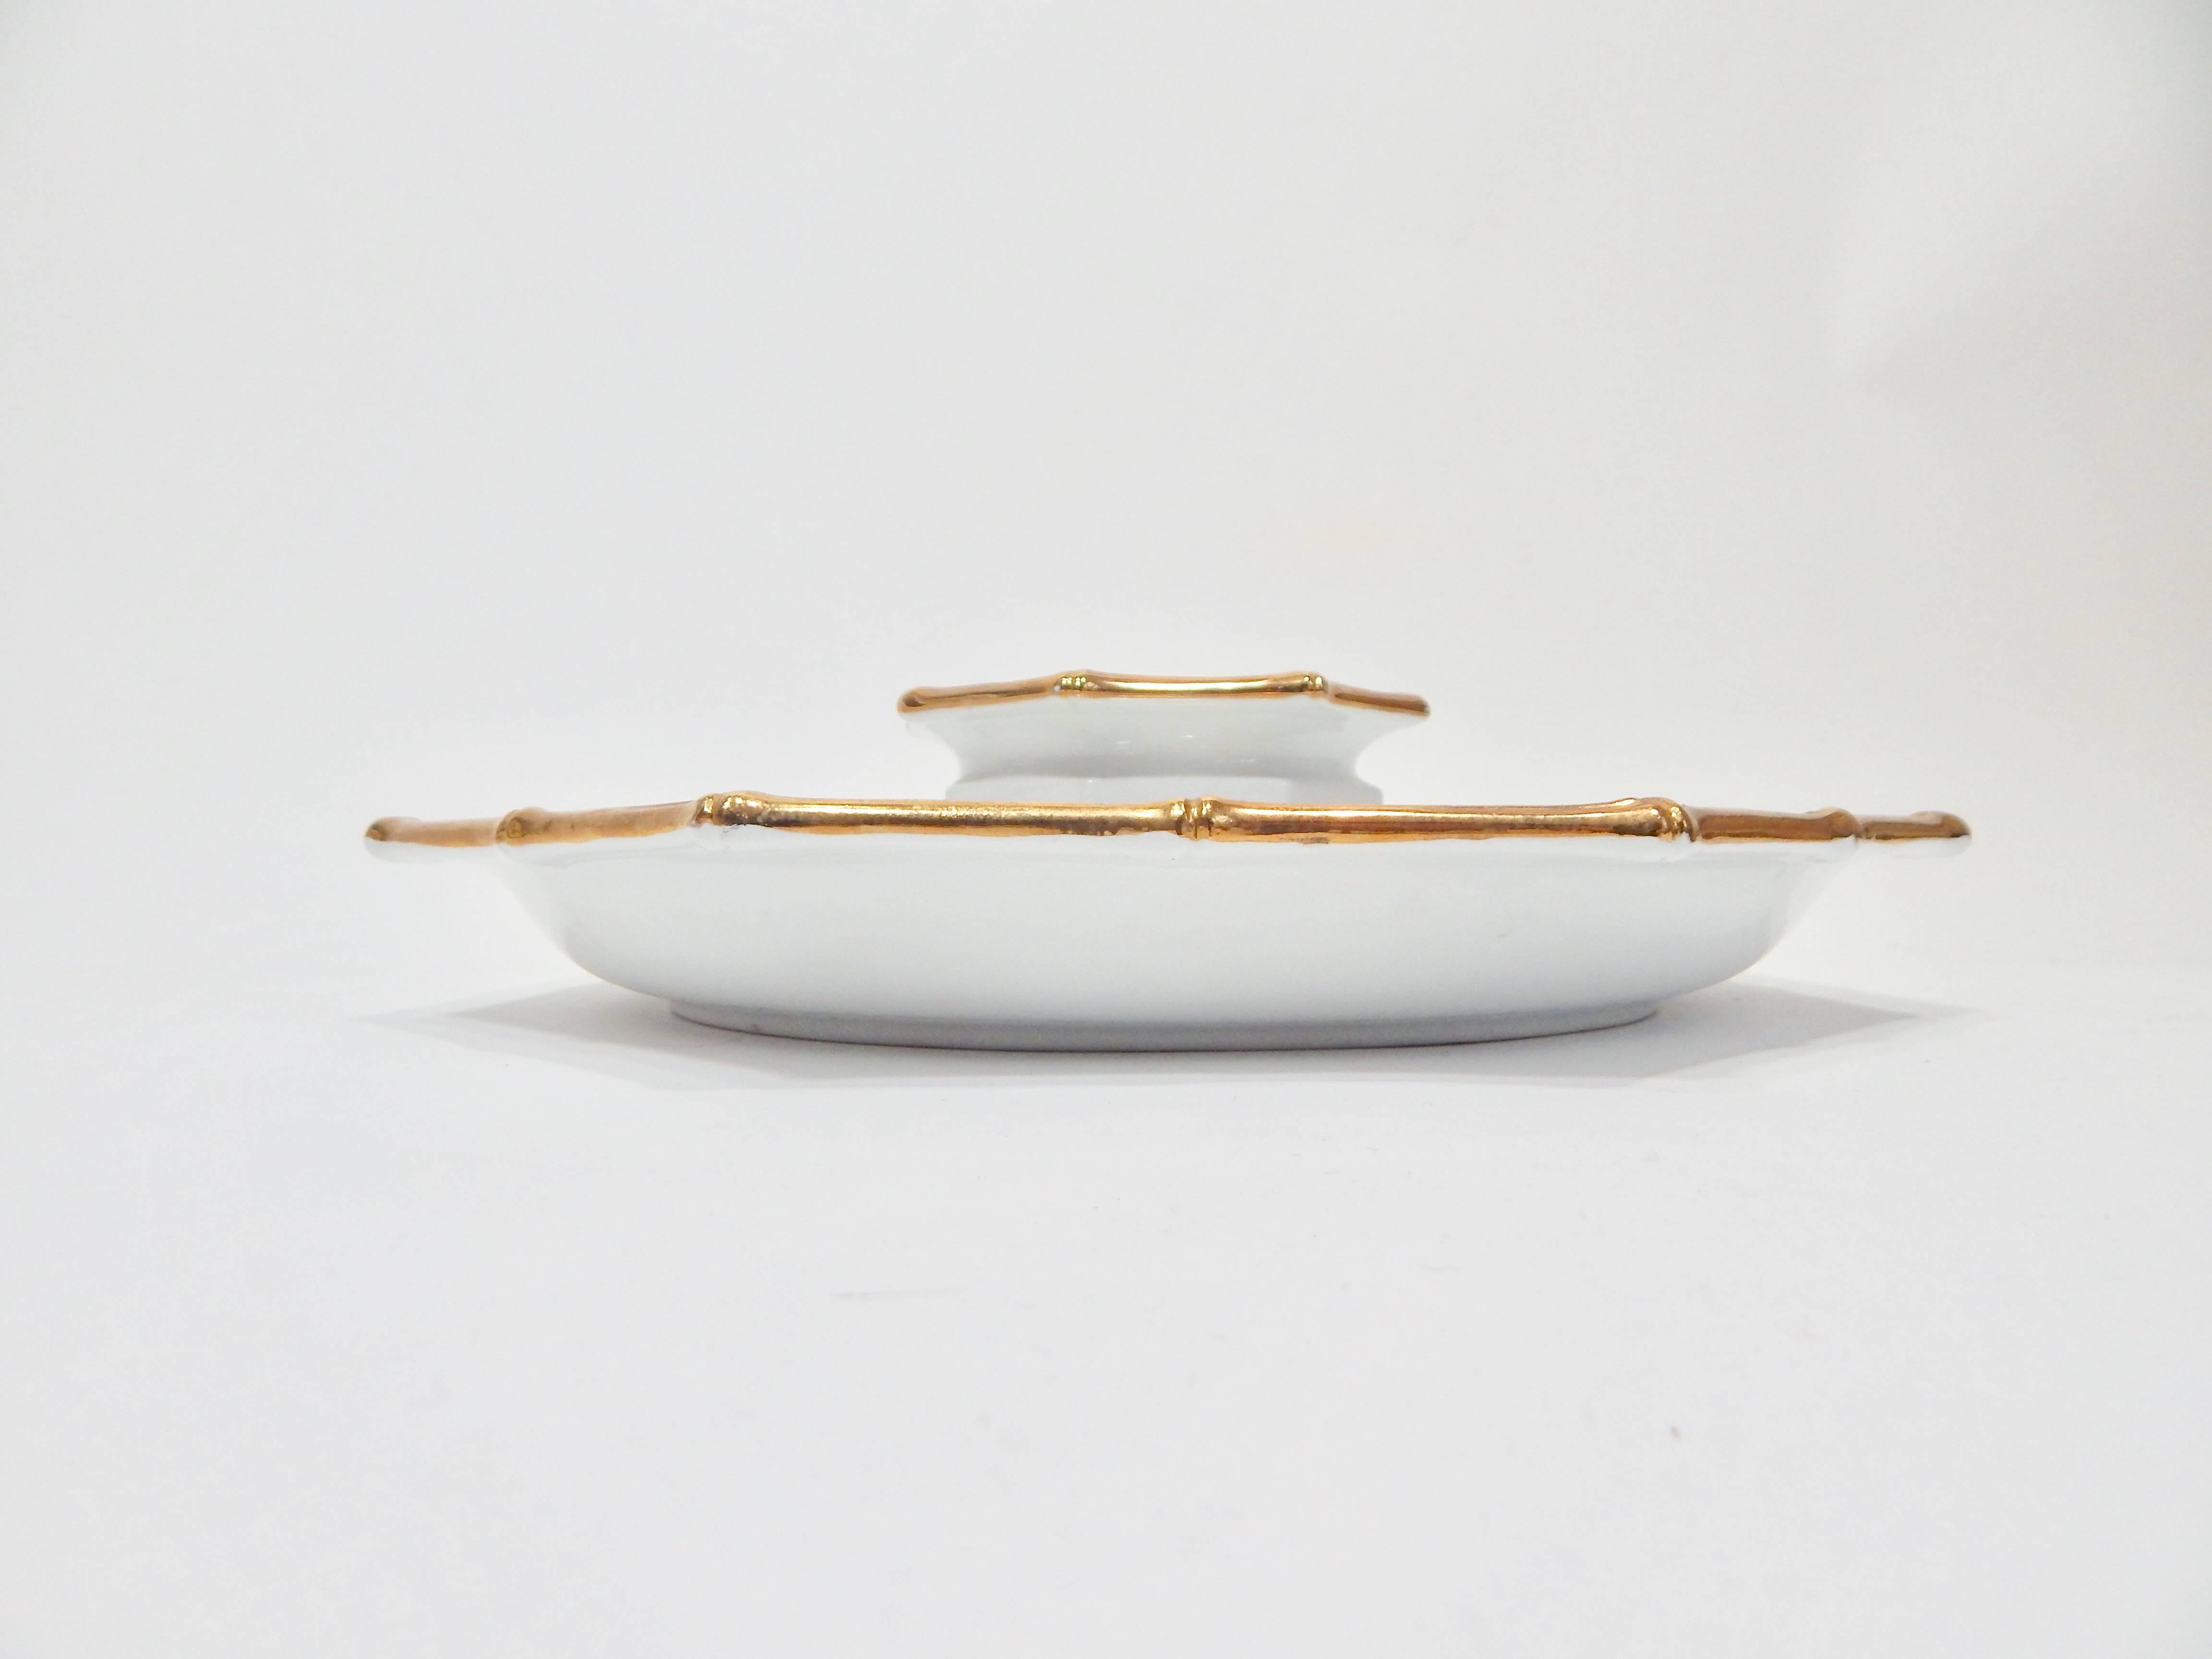 1970s serving plate or platter and bowl designed by Georges Briard. White ceramic with gold gilded faux bamboo trim. Two-piece set. Both pieces are signed. Still retains original stamp. Excellent Condition. US Domestic Shipping is complimentary free